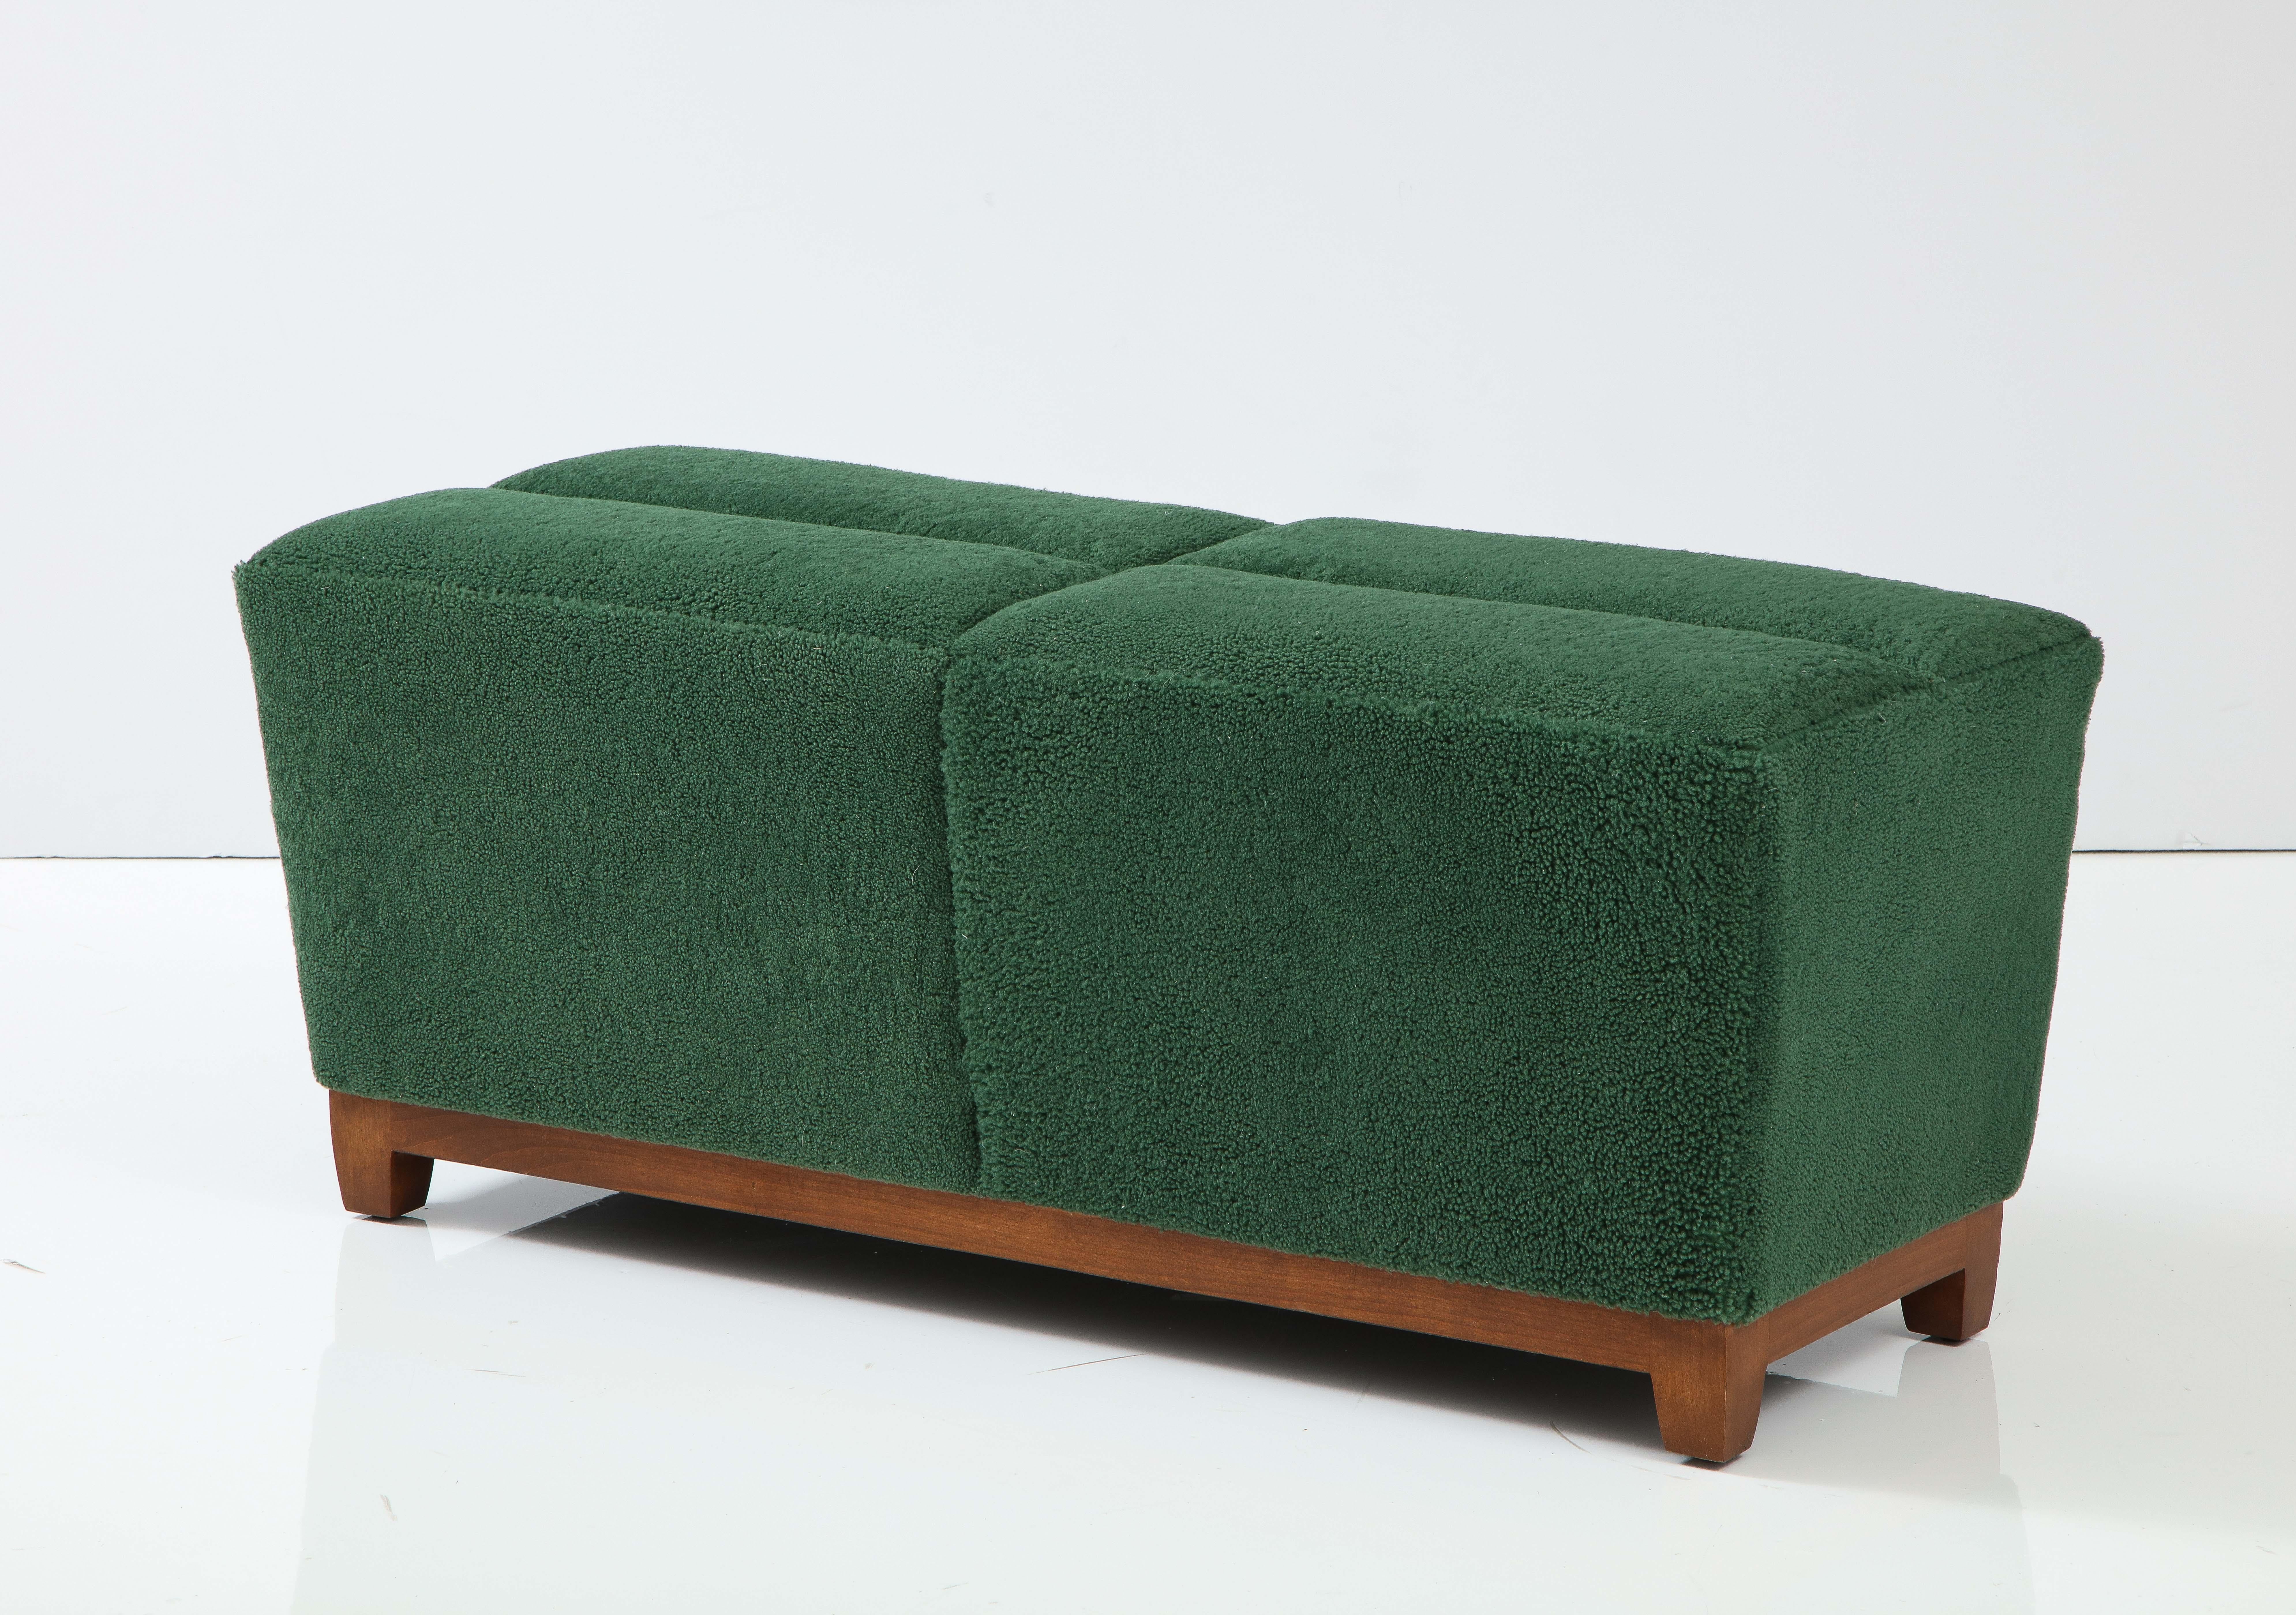 Bespoke Scandinavian Modern bench custom upholstered in dense forest green sheepskins. Bench rests on sold cherry frame and seat crown has a slightly quilted effect.
Mint restored.